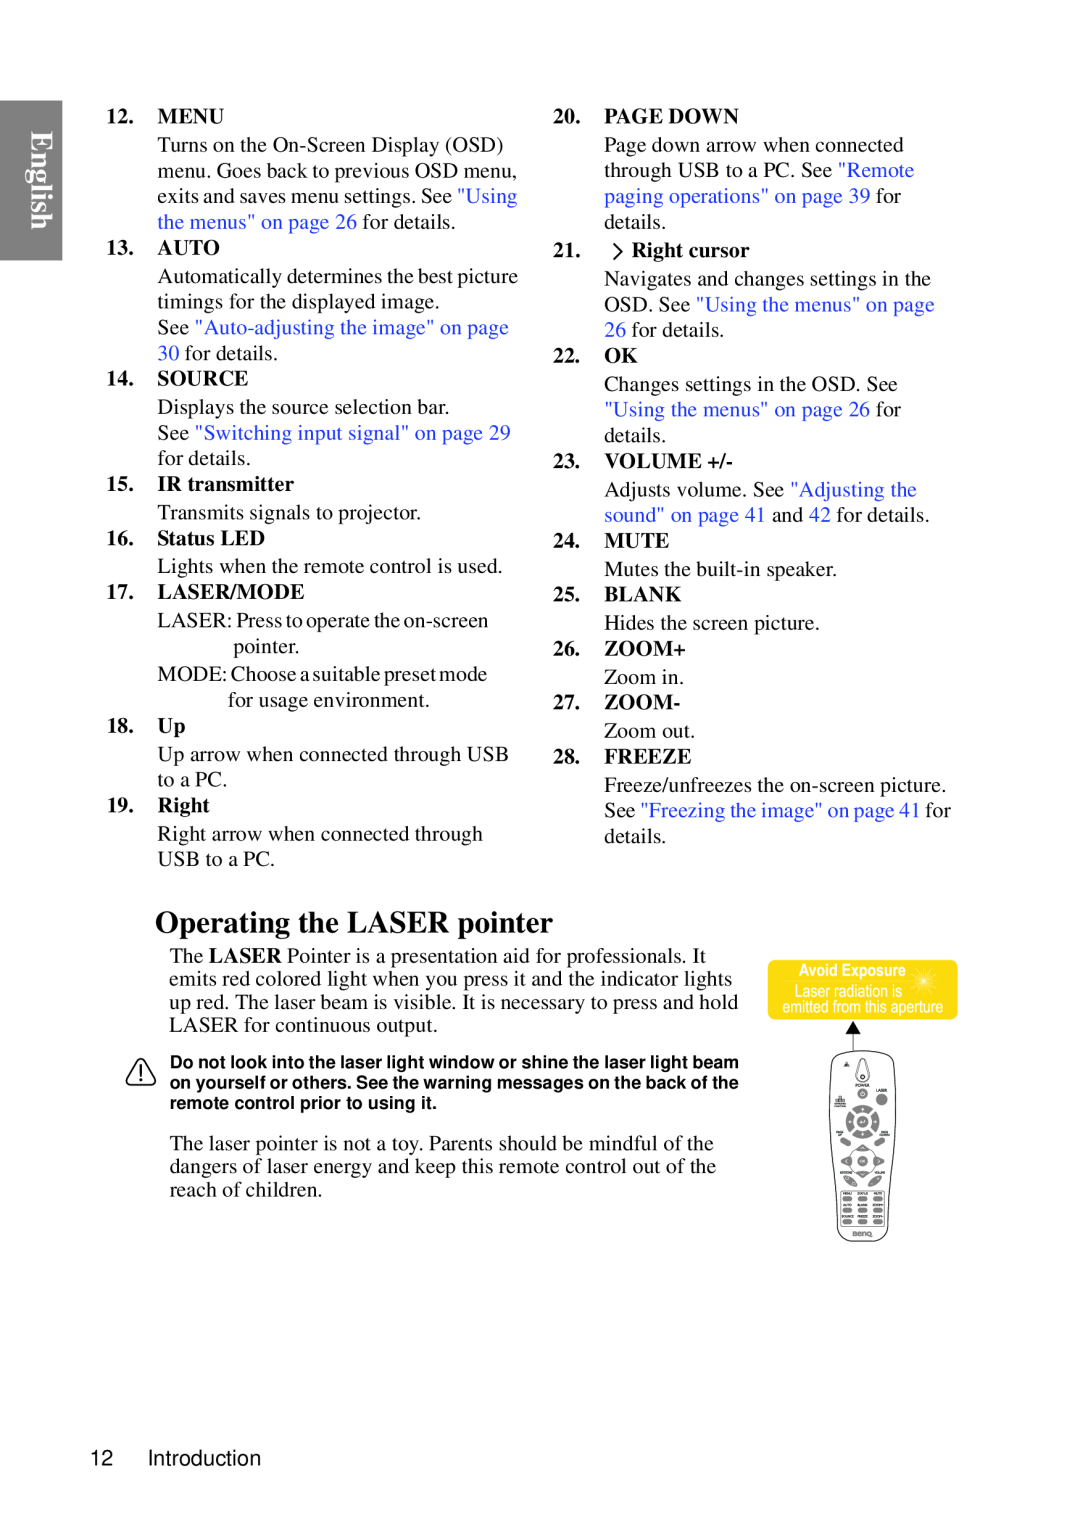 BenQ SP840 user manual Operating the LASER pointer, English, See Auto-adjusting the image on page 30 for details 